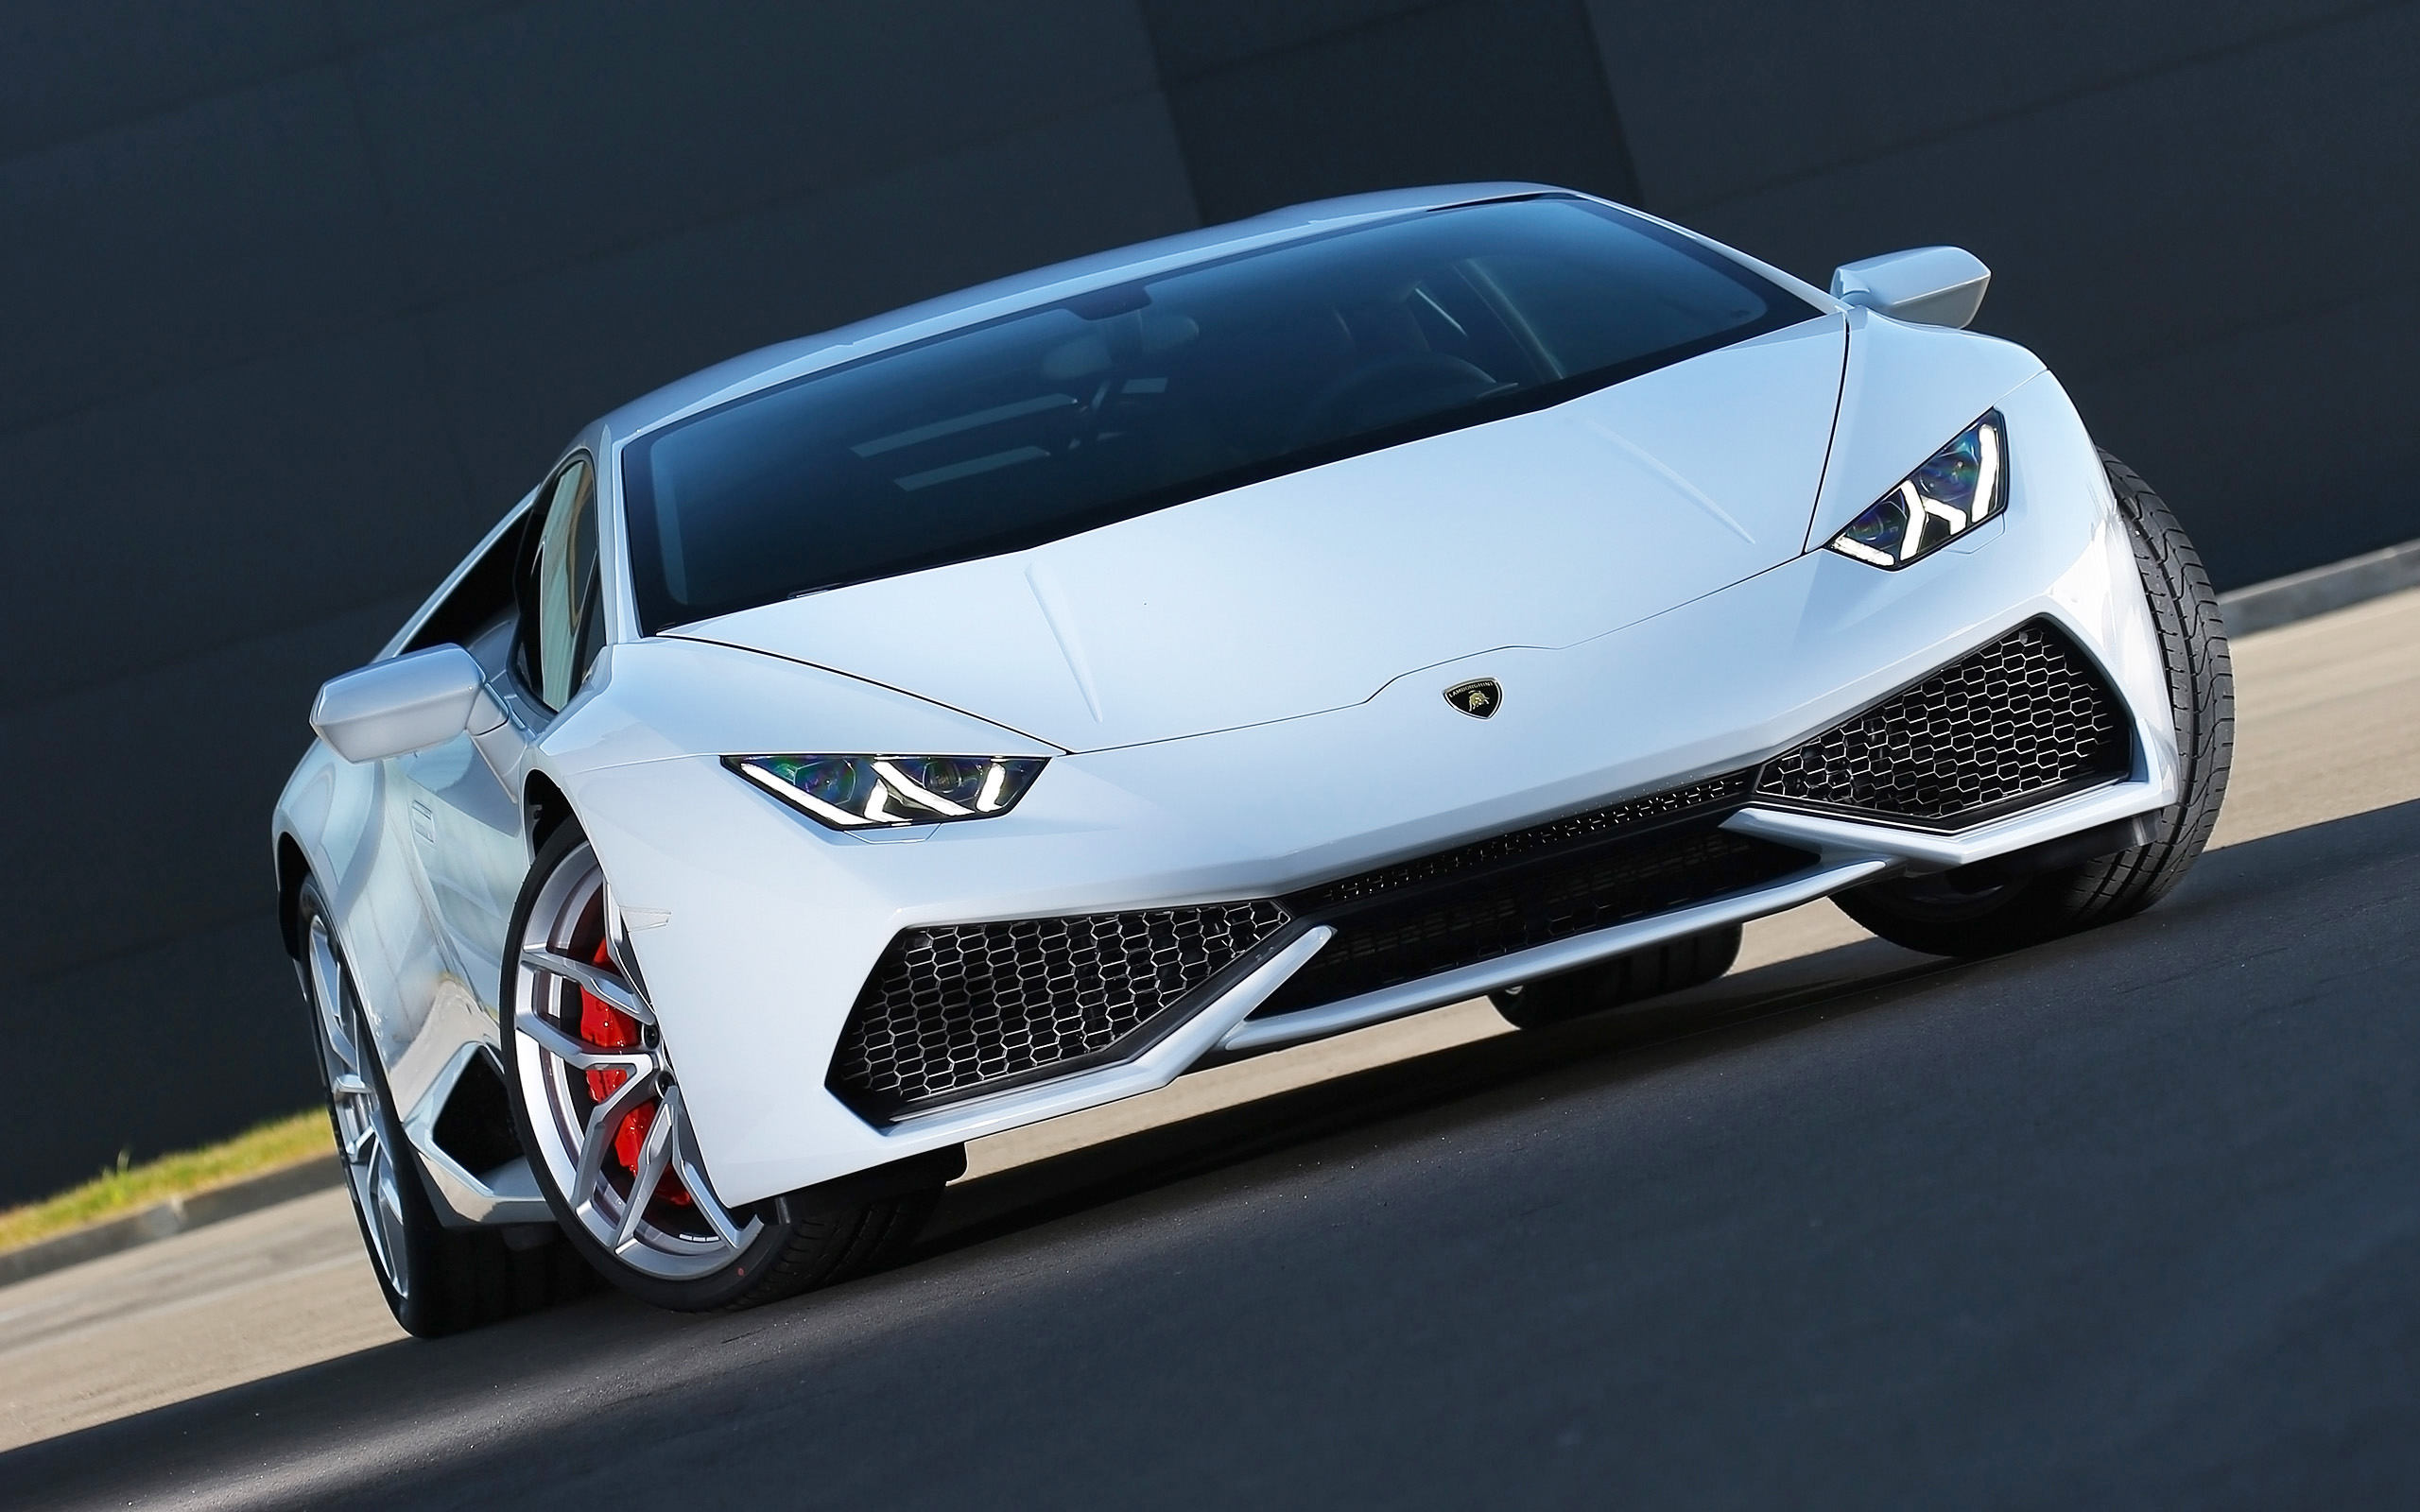 Lamborghini Huracan Hd Wallpapers Backgrounds Pictures to pin on 